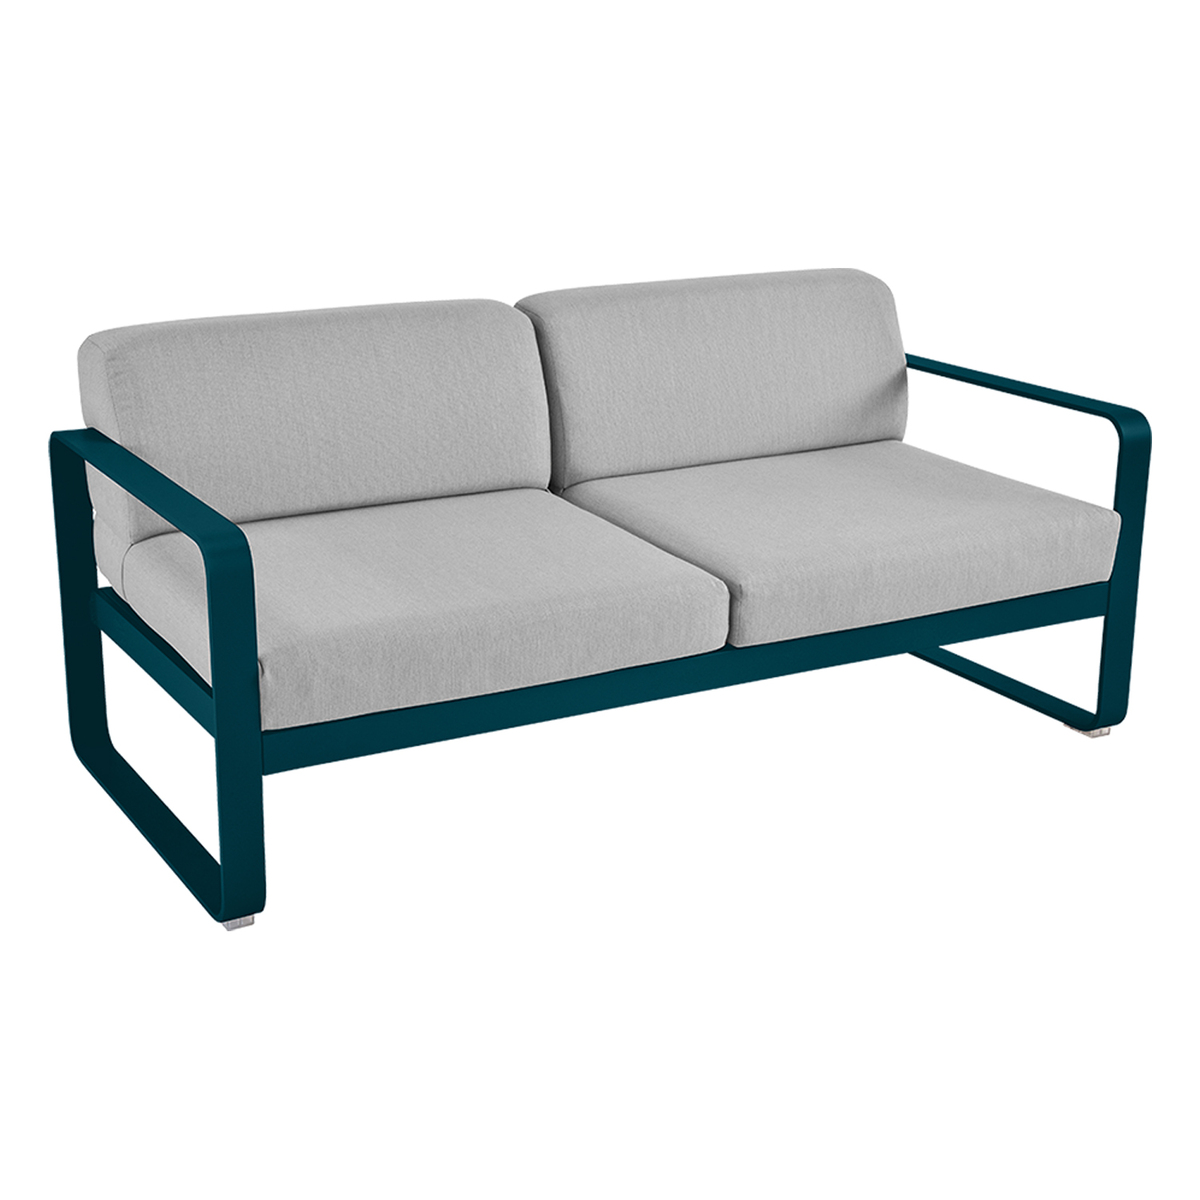 Fermob Bellevie 2-seater sofa, acapulco blue - flannel grey | Pre-used ...